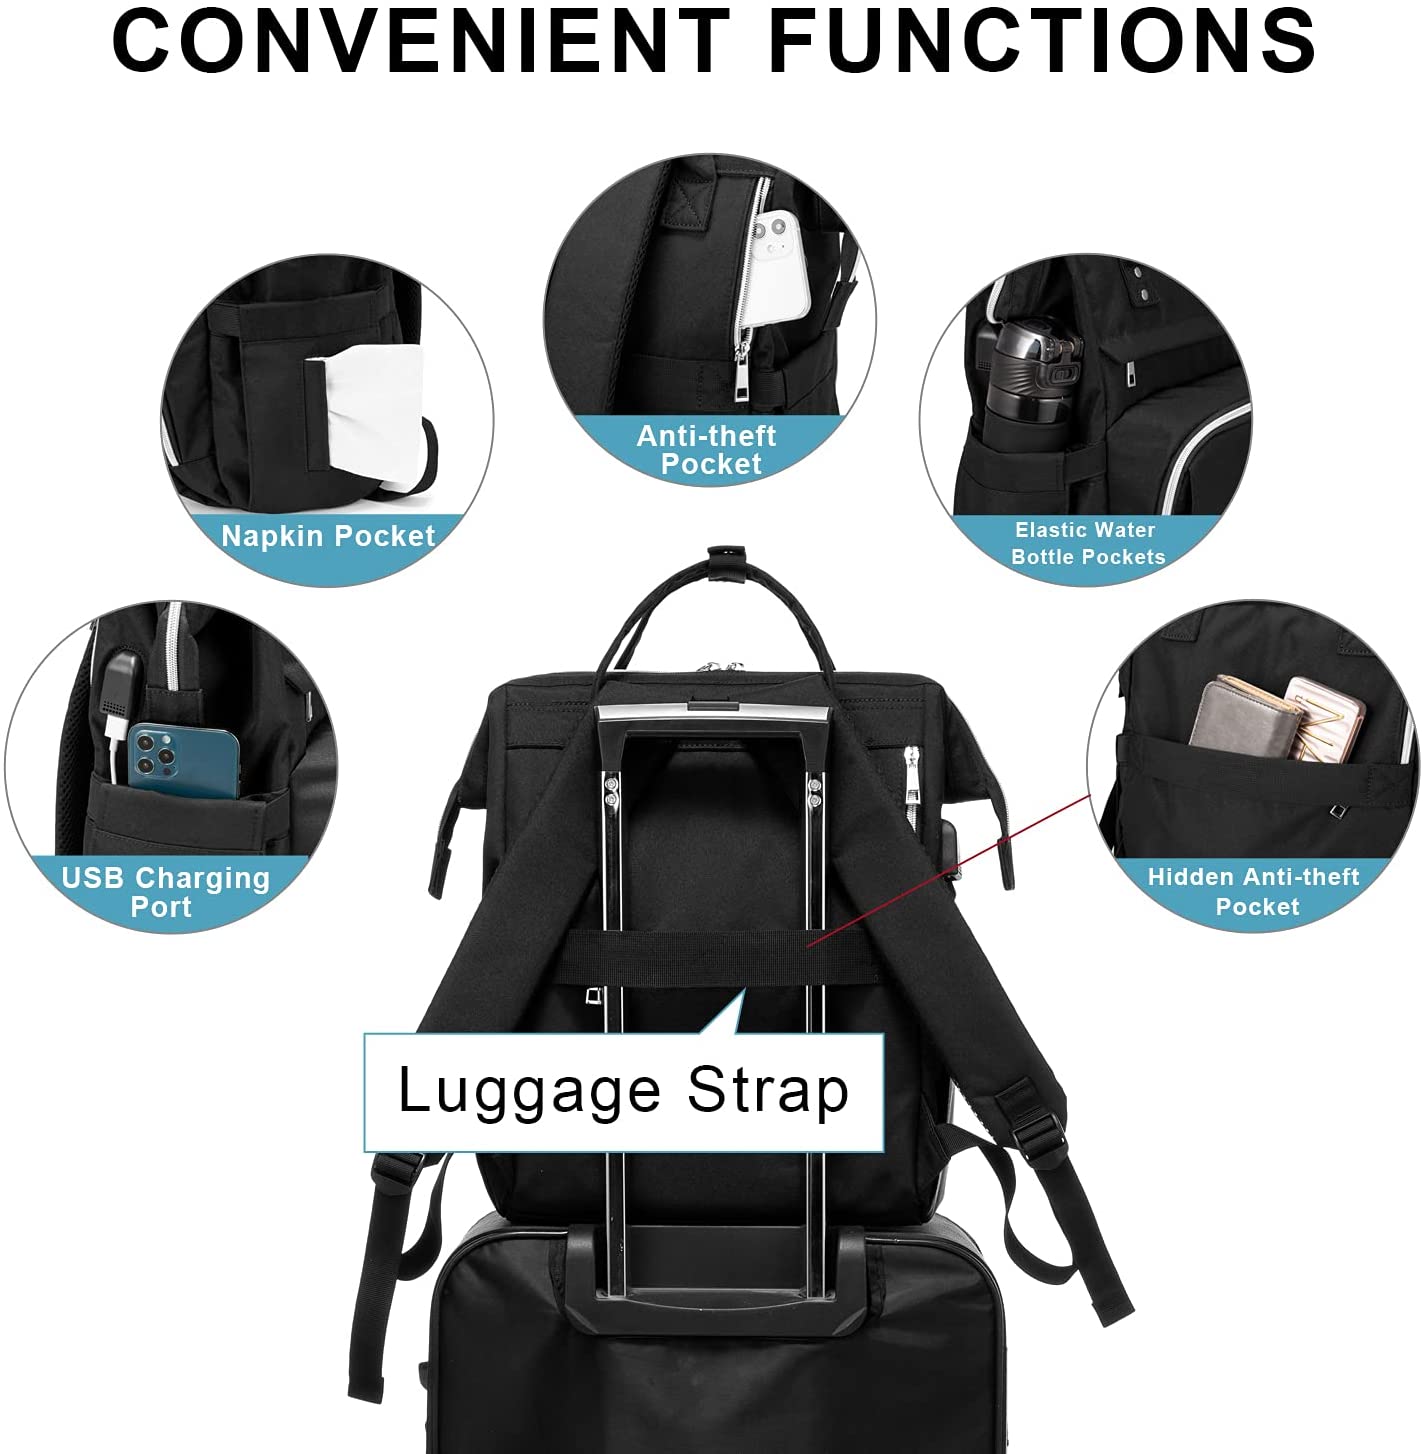 Laptop Backpack for Women 15.6 Inch Travel School College Backpack Nurse Teacher Work Bags Computer Backpack Casual Daypack Purse, Black - image 3 of 7